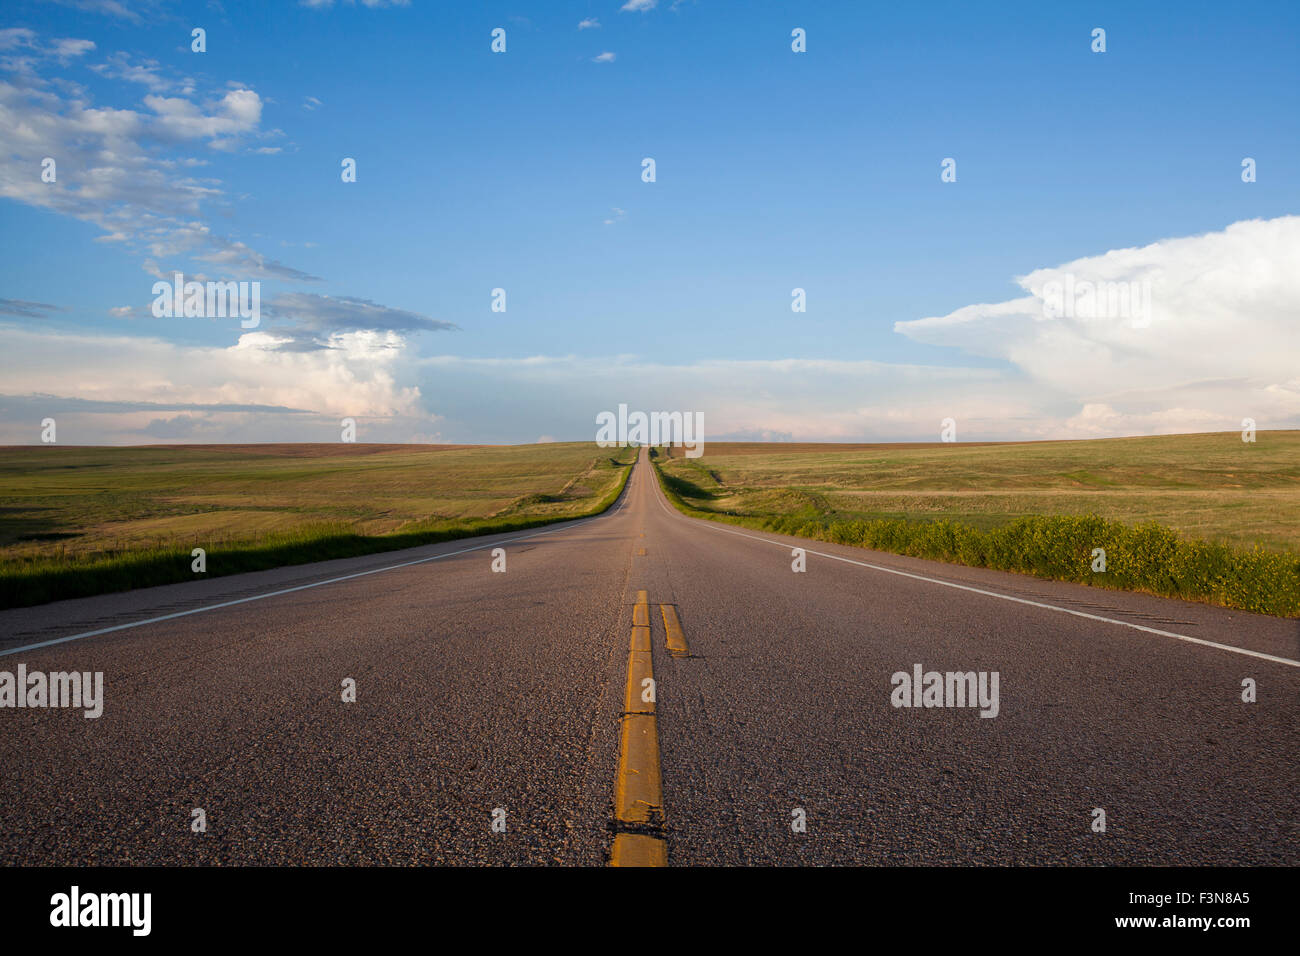 Straight road in the middle  of empty field, Colorado, USA Stock Photo